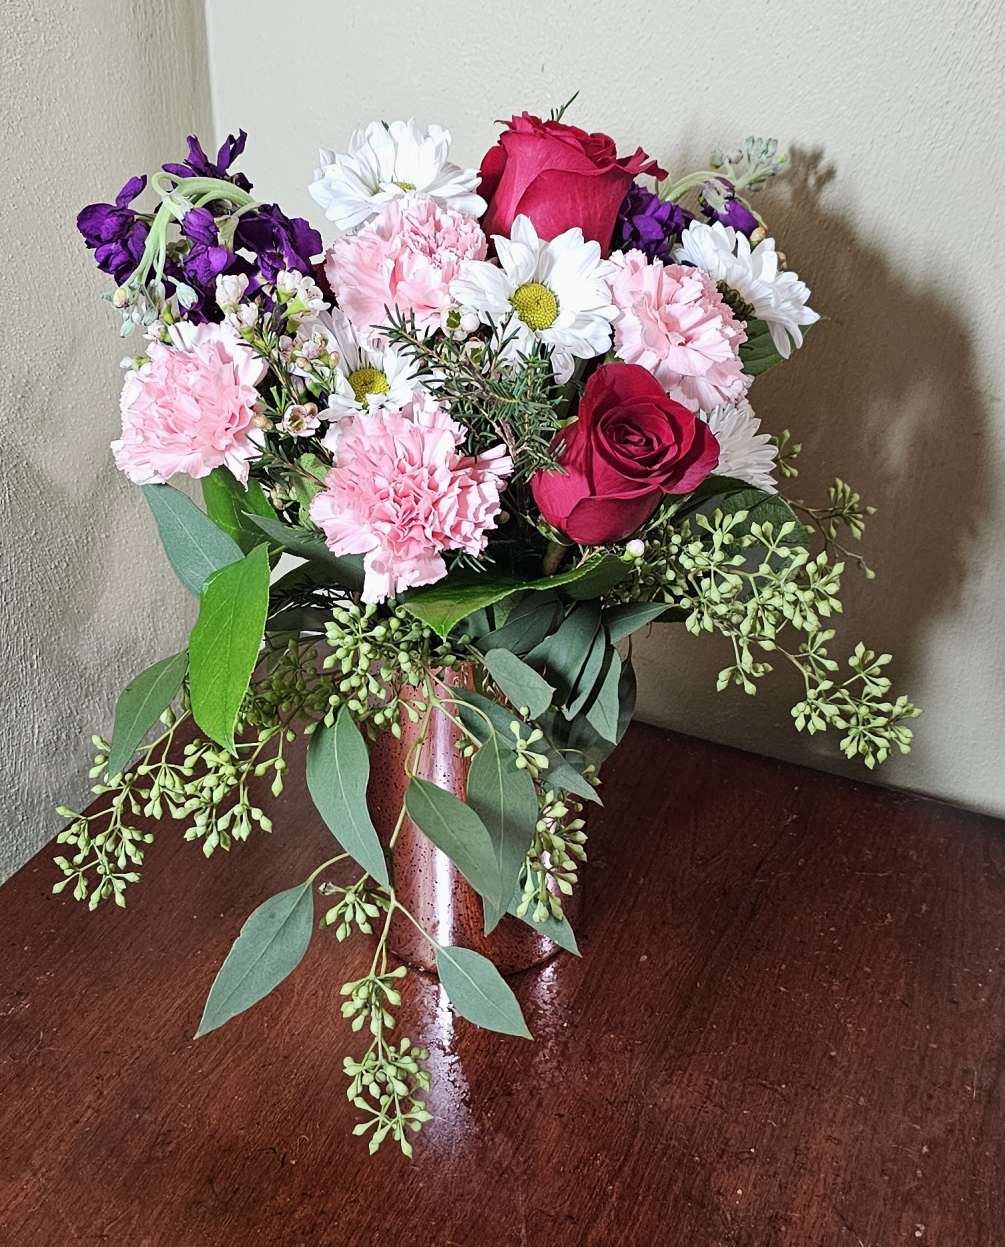 Pink reflective vase with assortment of pink, white, and purple flowers.